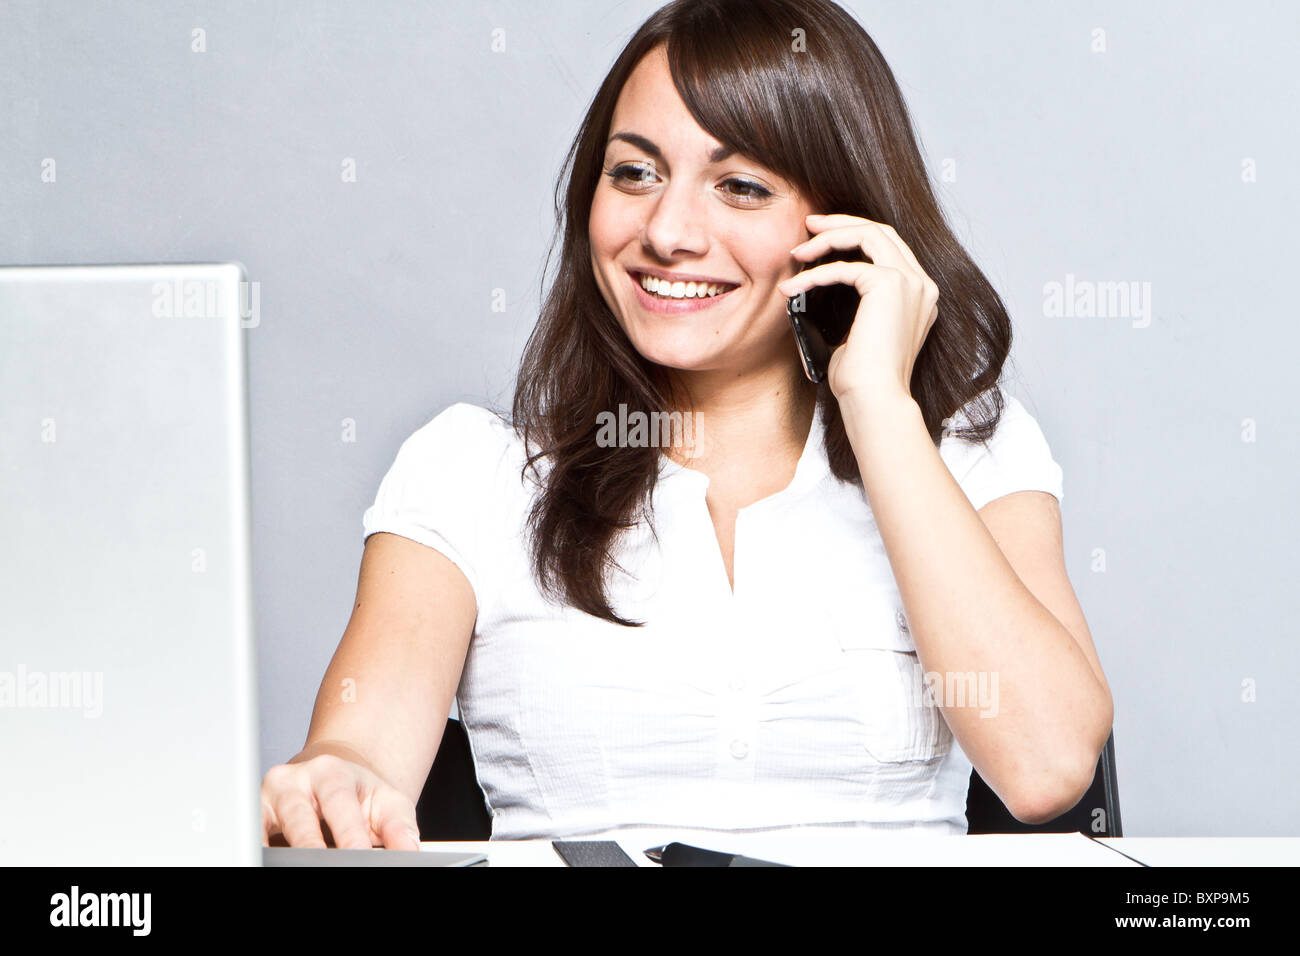 Friendly phonecall Banque D'Images